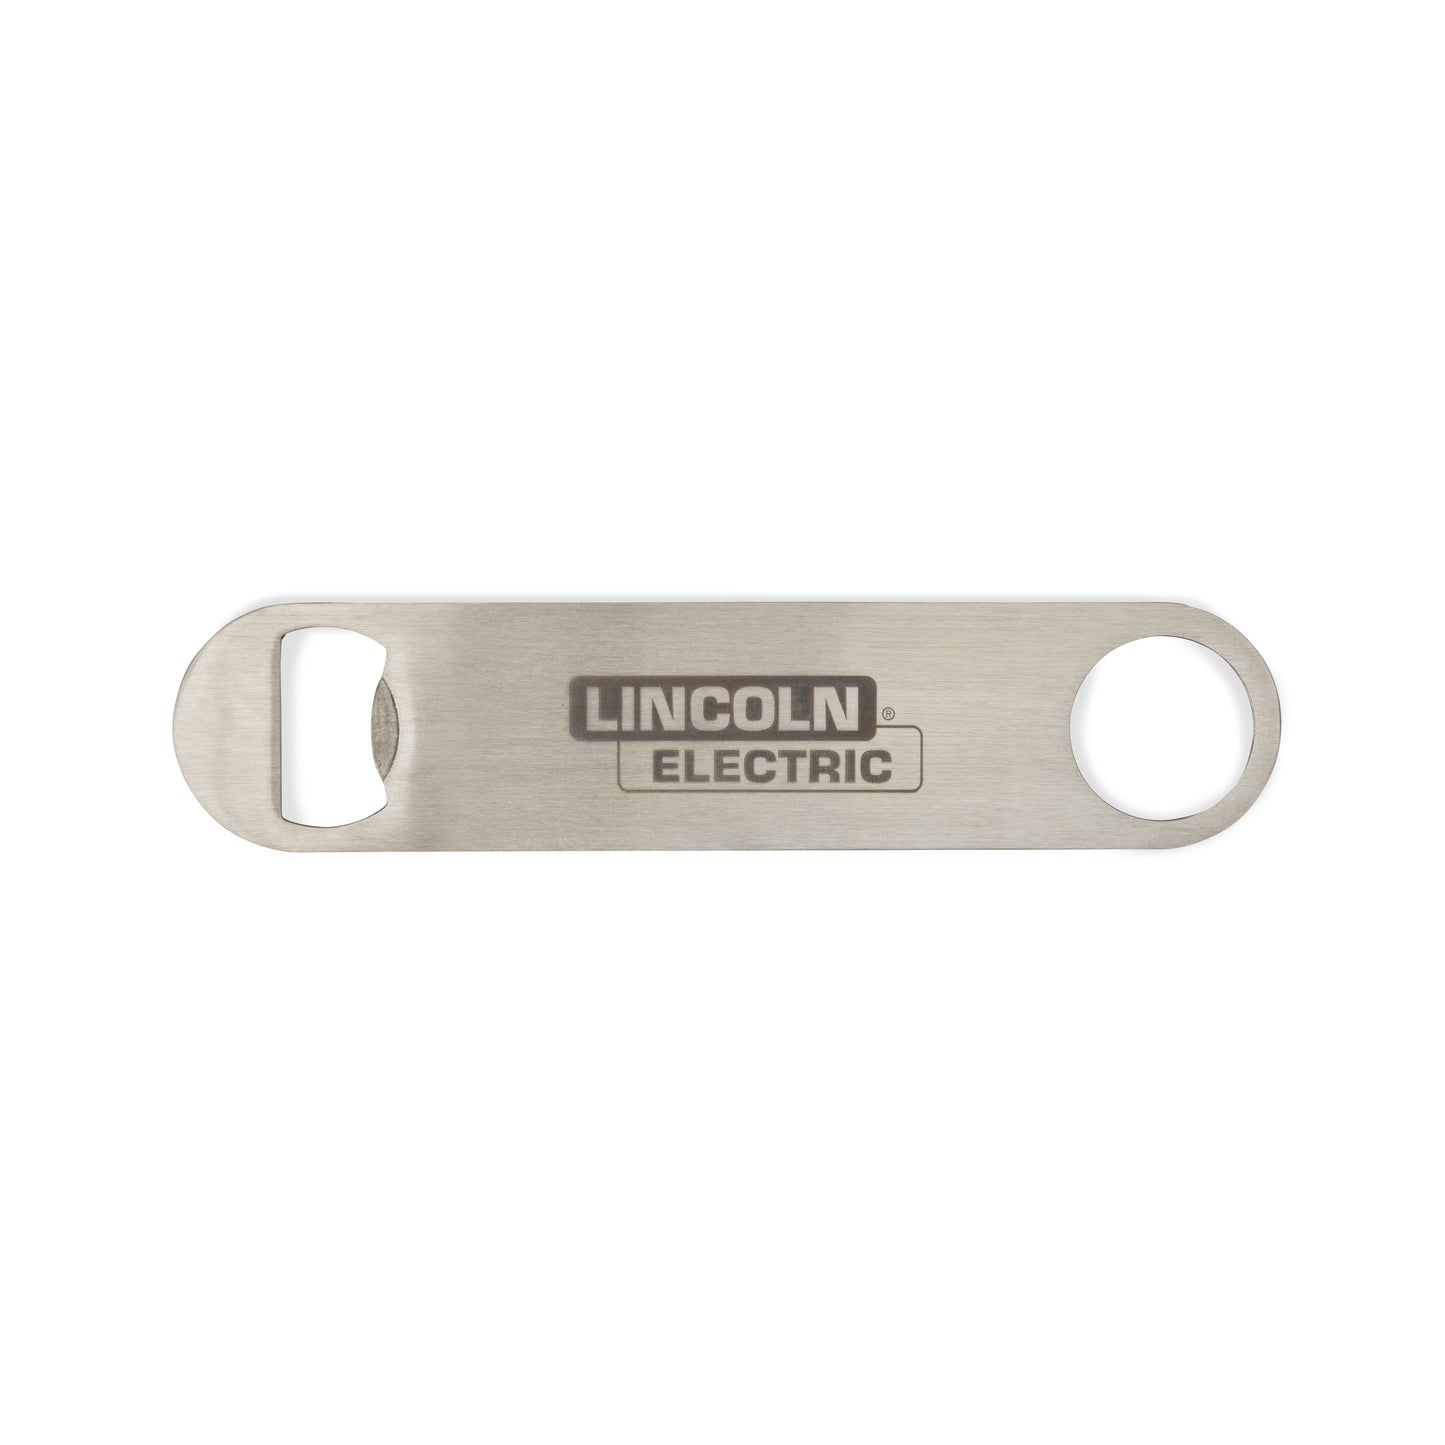 Lincoln Electric Bottle Opener